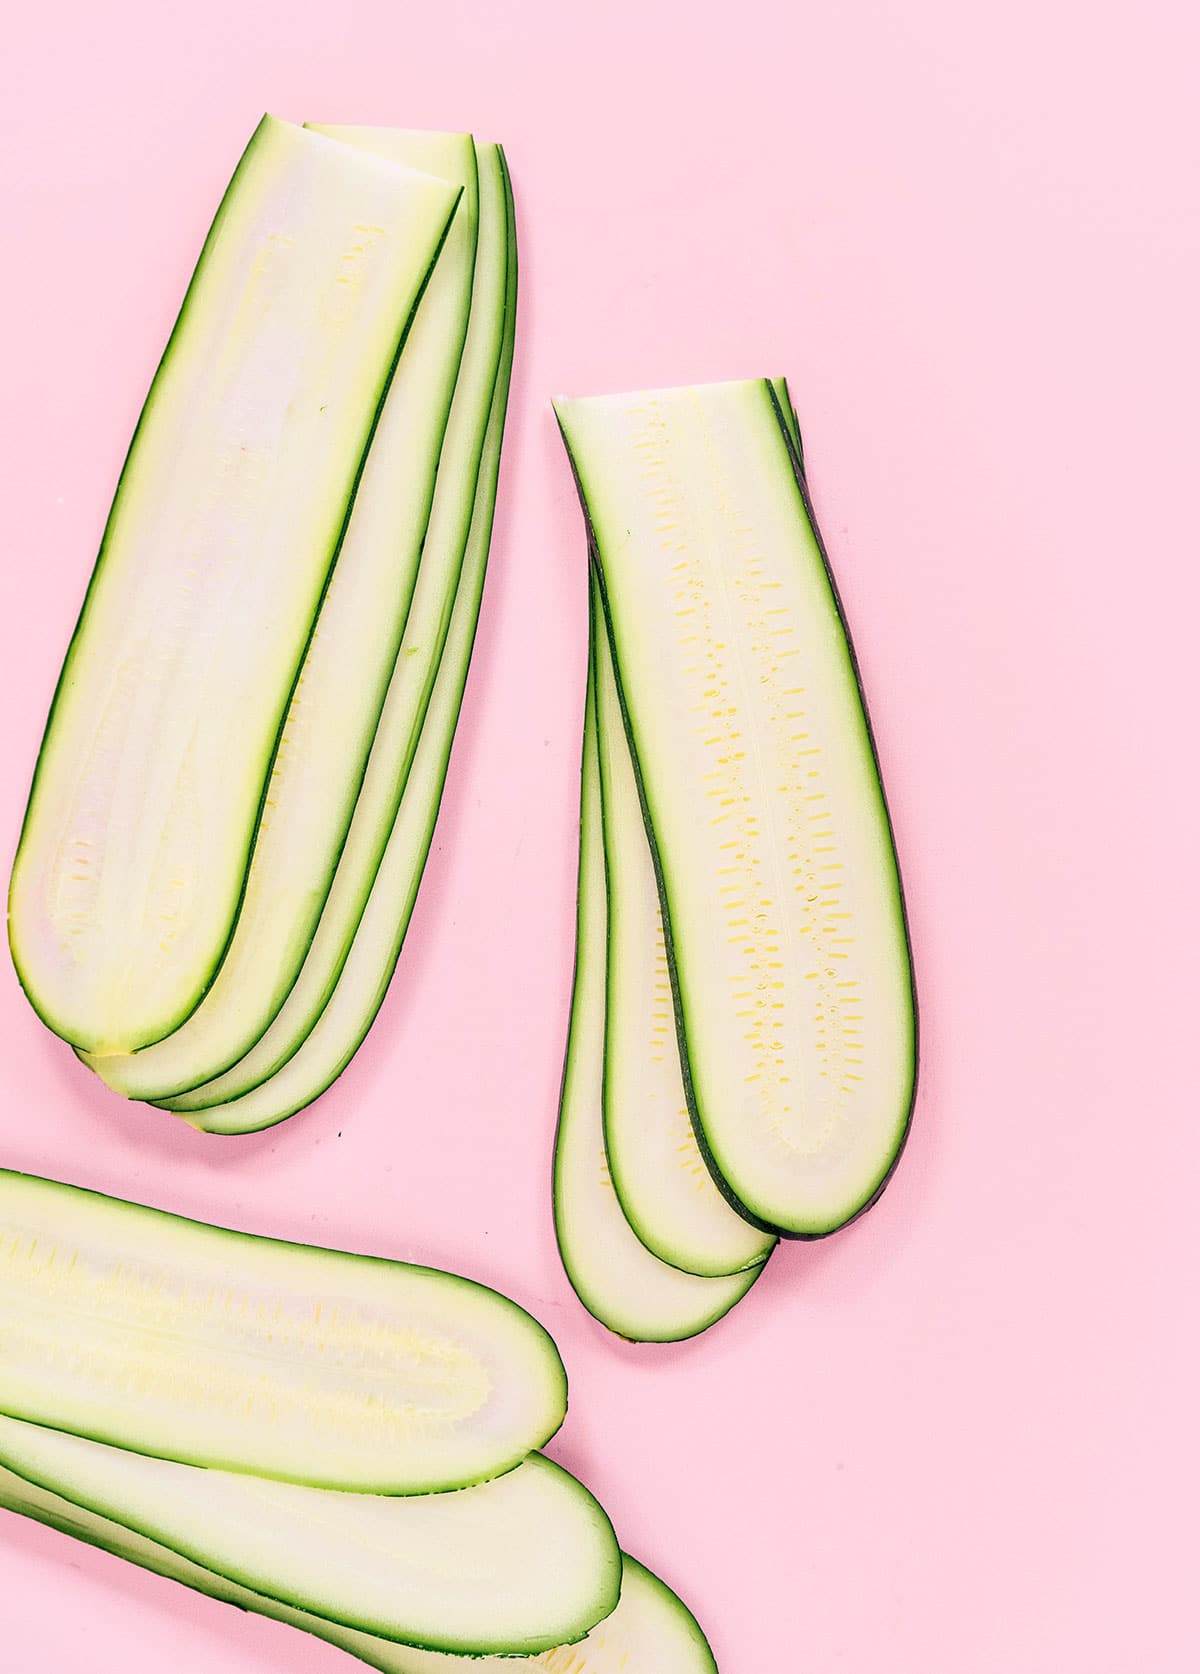 Multiple thin, lengthwise slices of zucchini laid flat on a pink back ground.